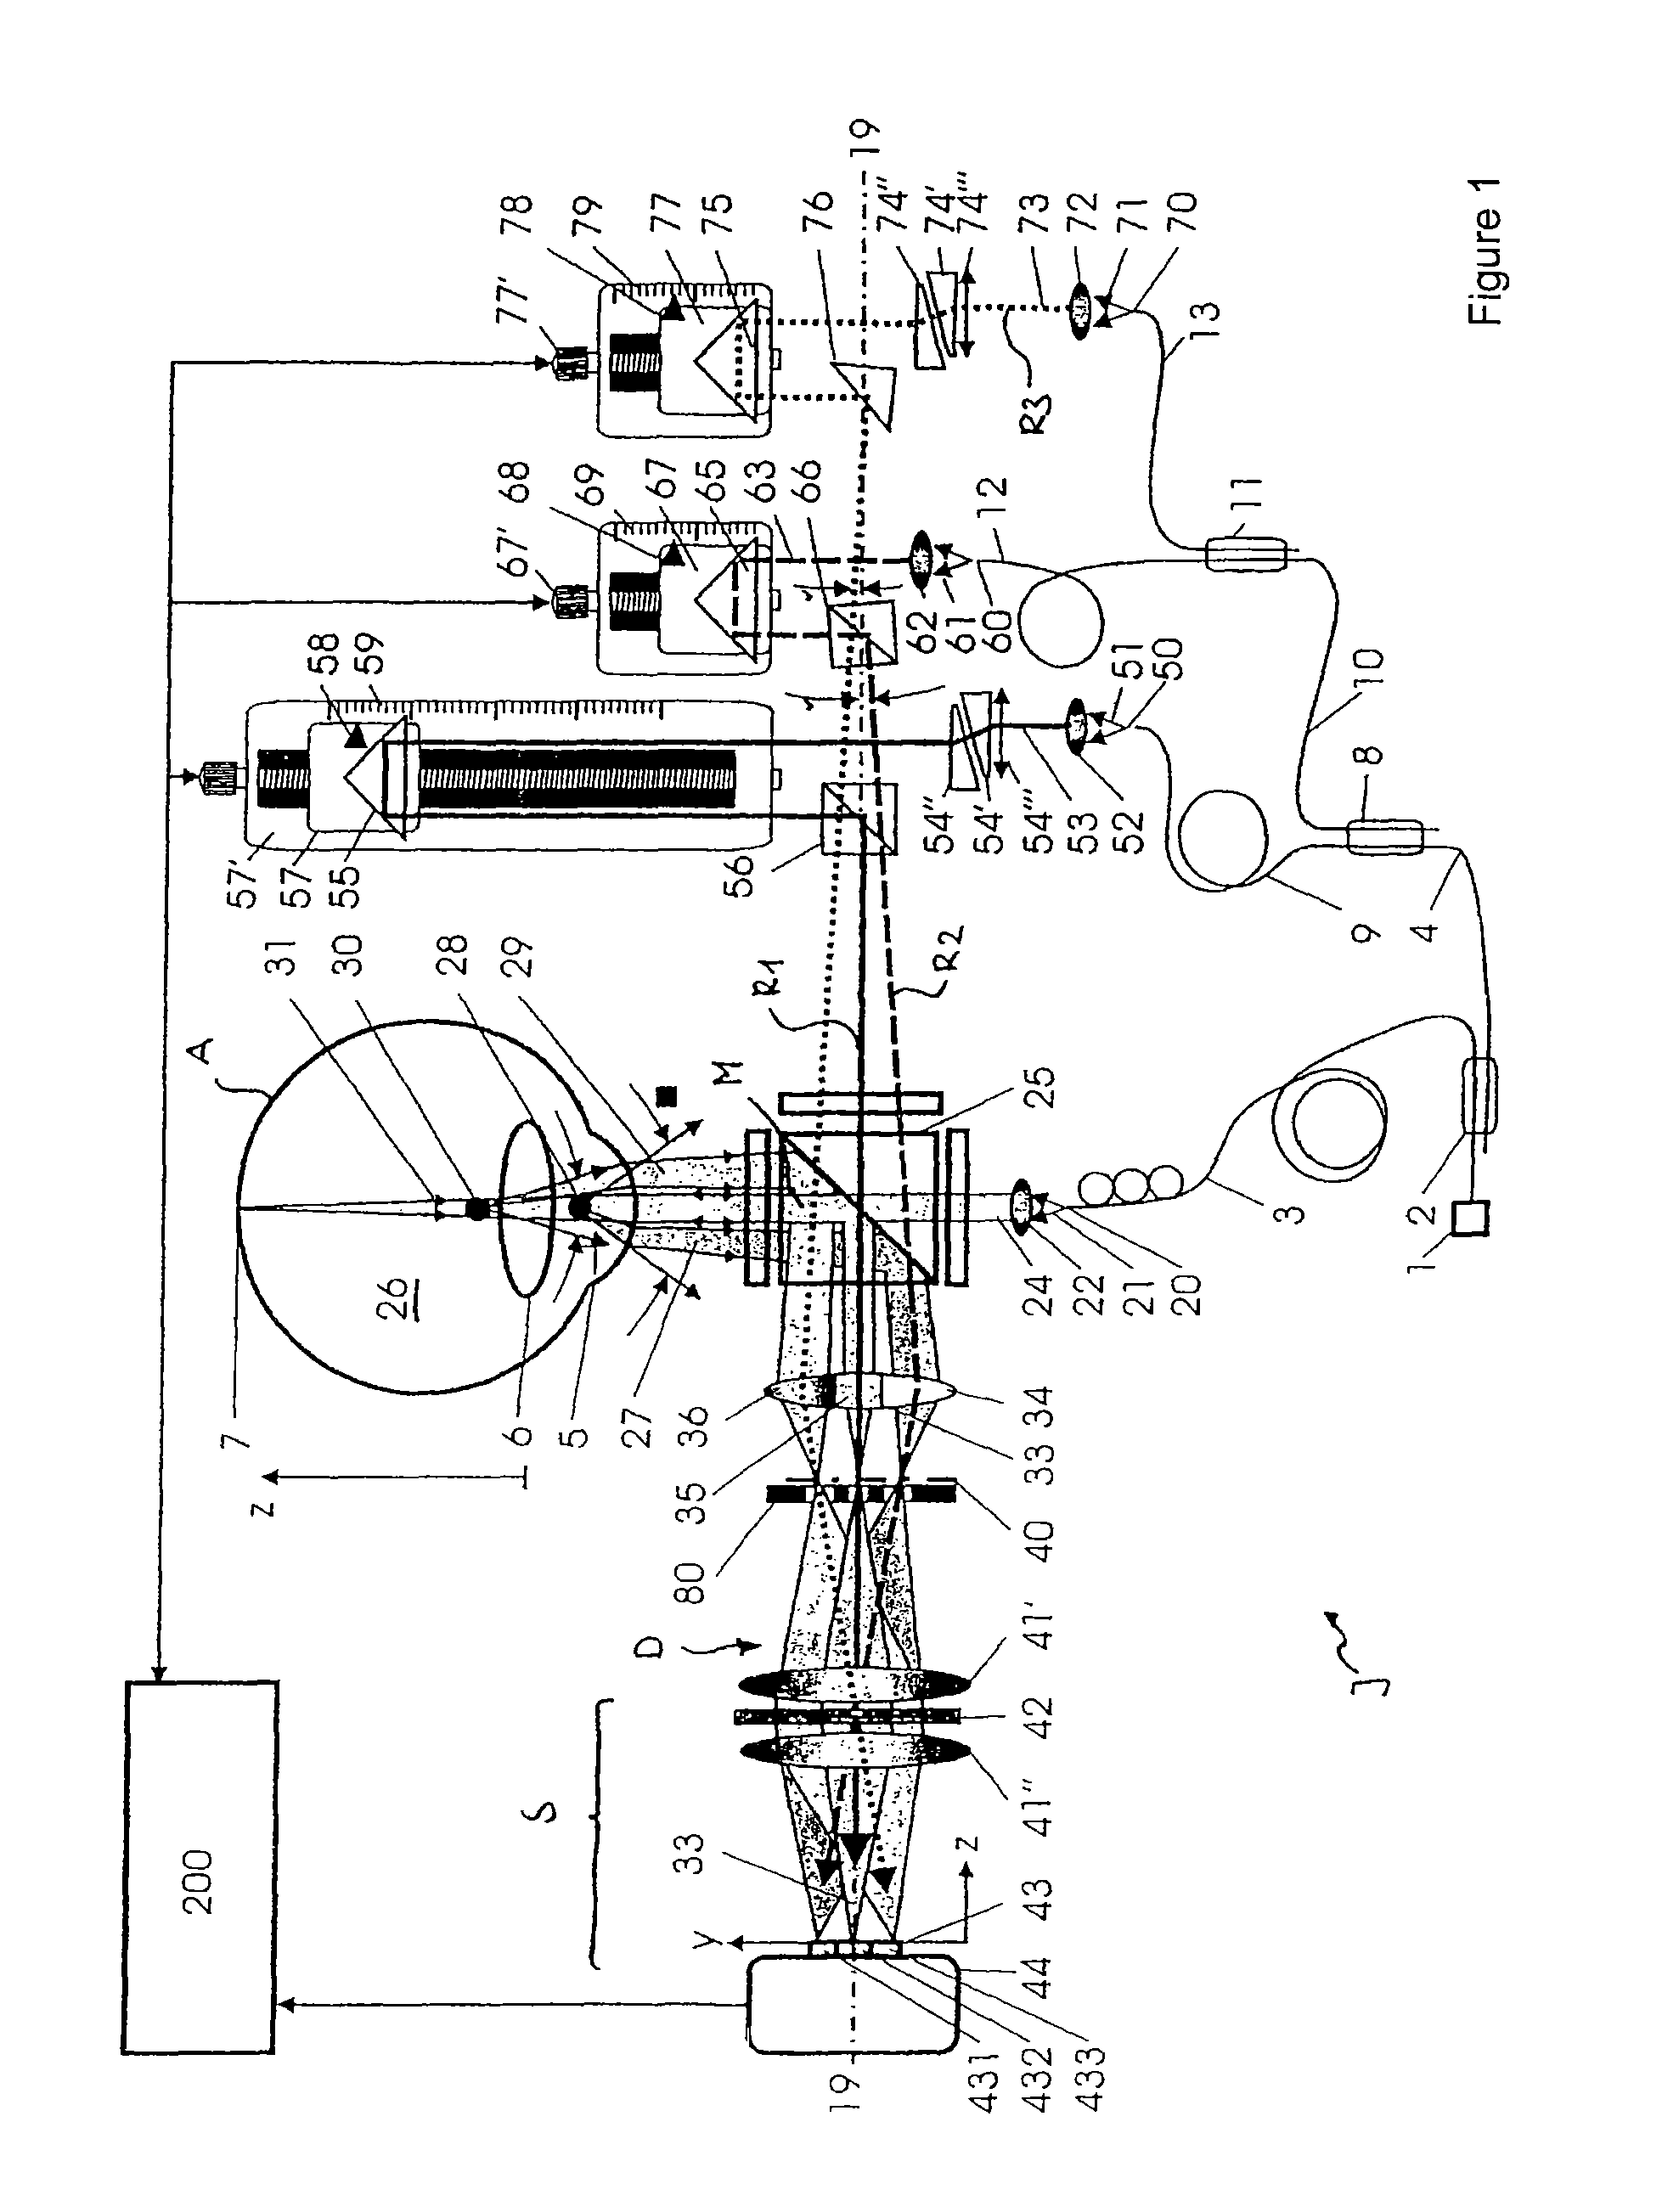 Apparatus and method for interferometric measurement of a sample